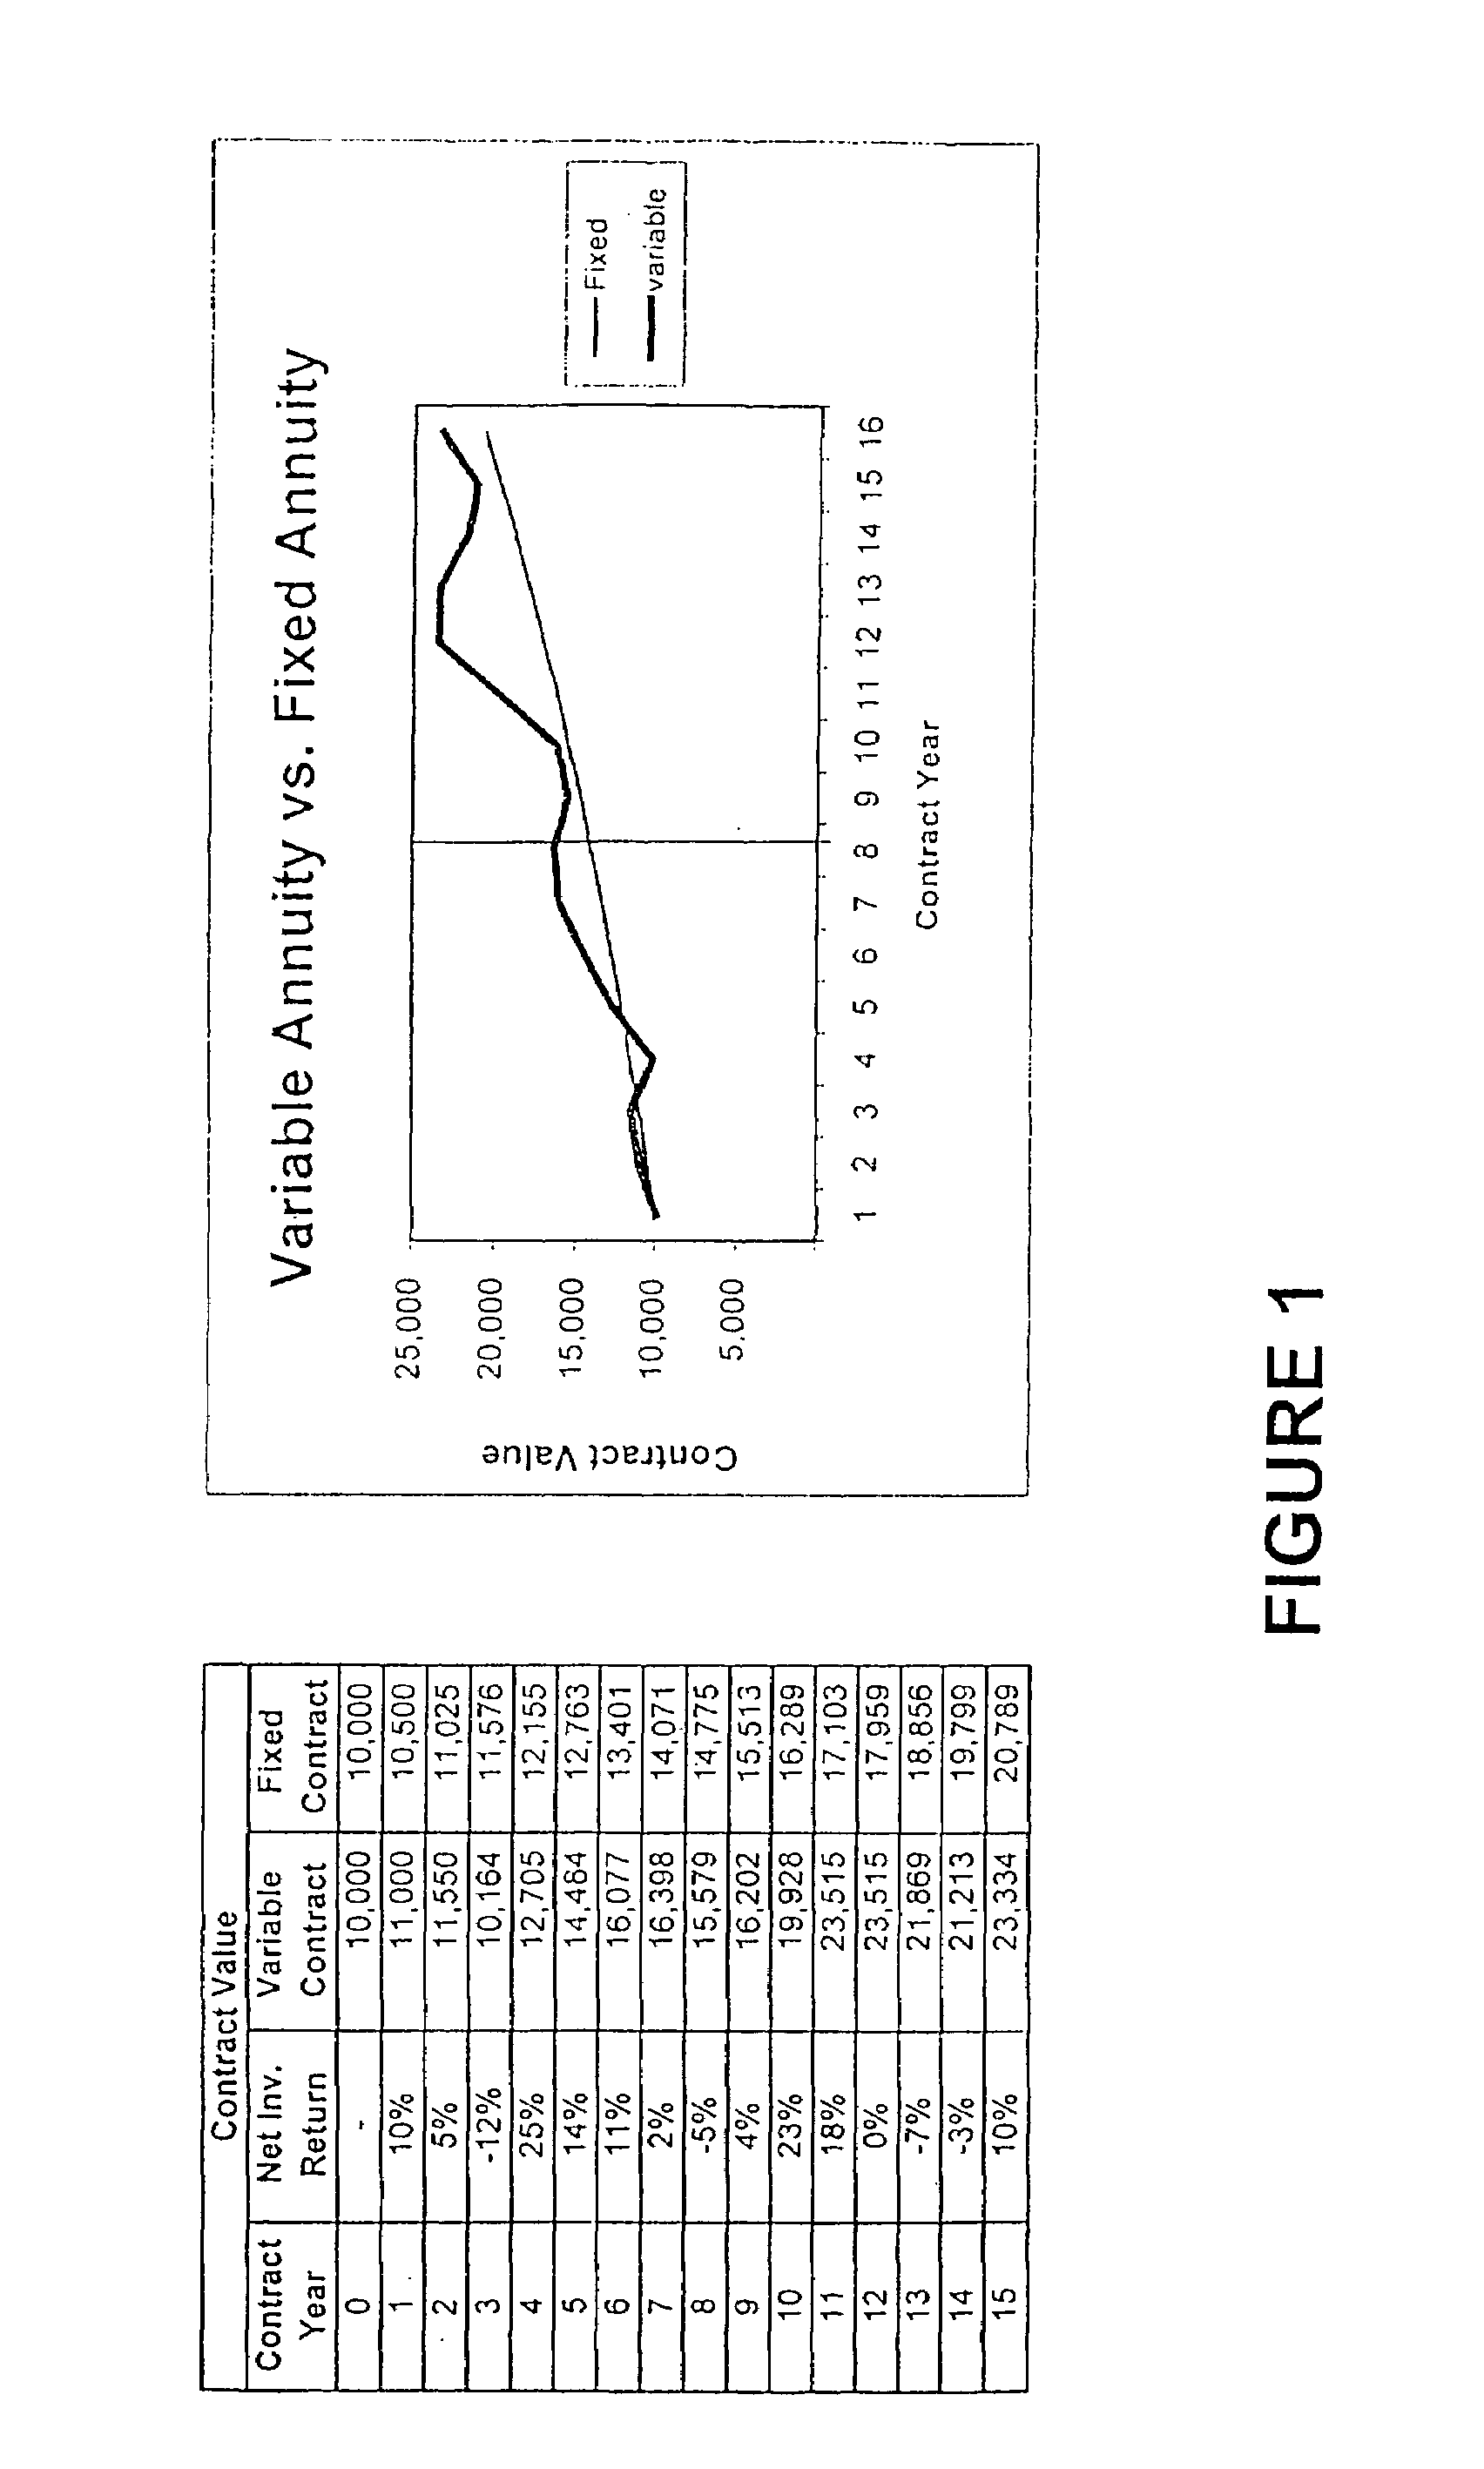 Method and system for providing retirement income benefits